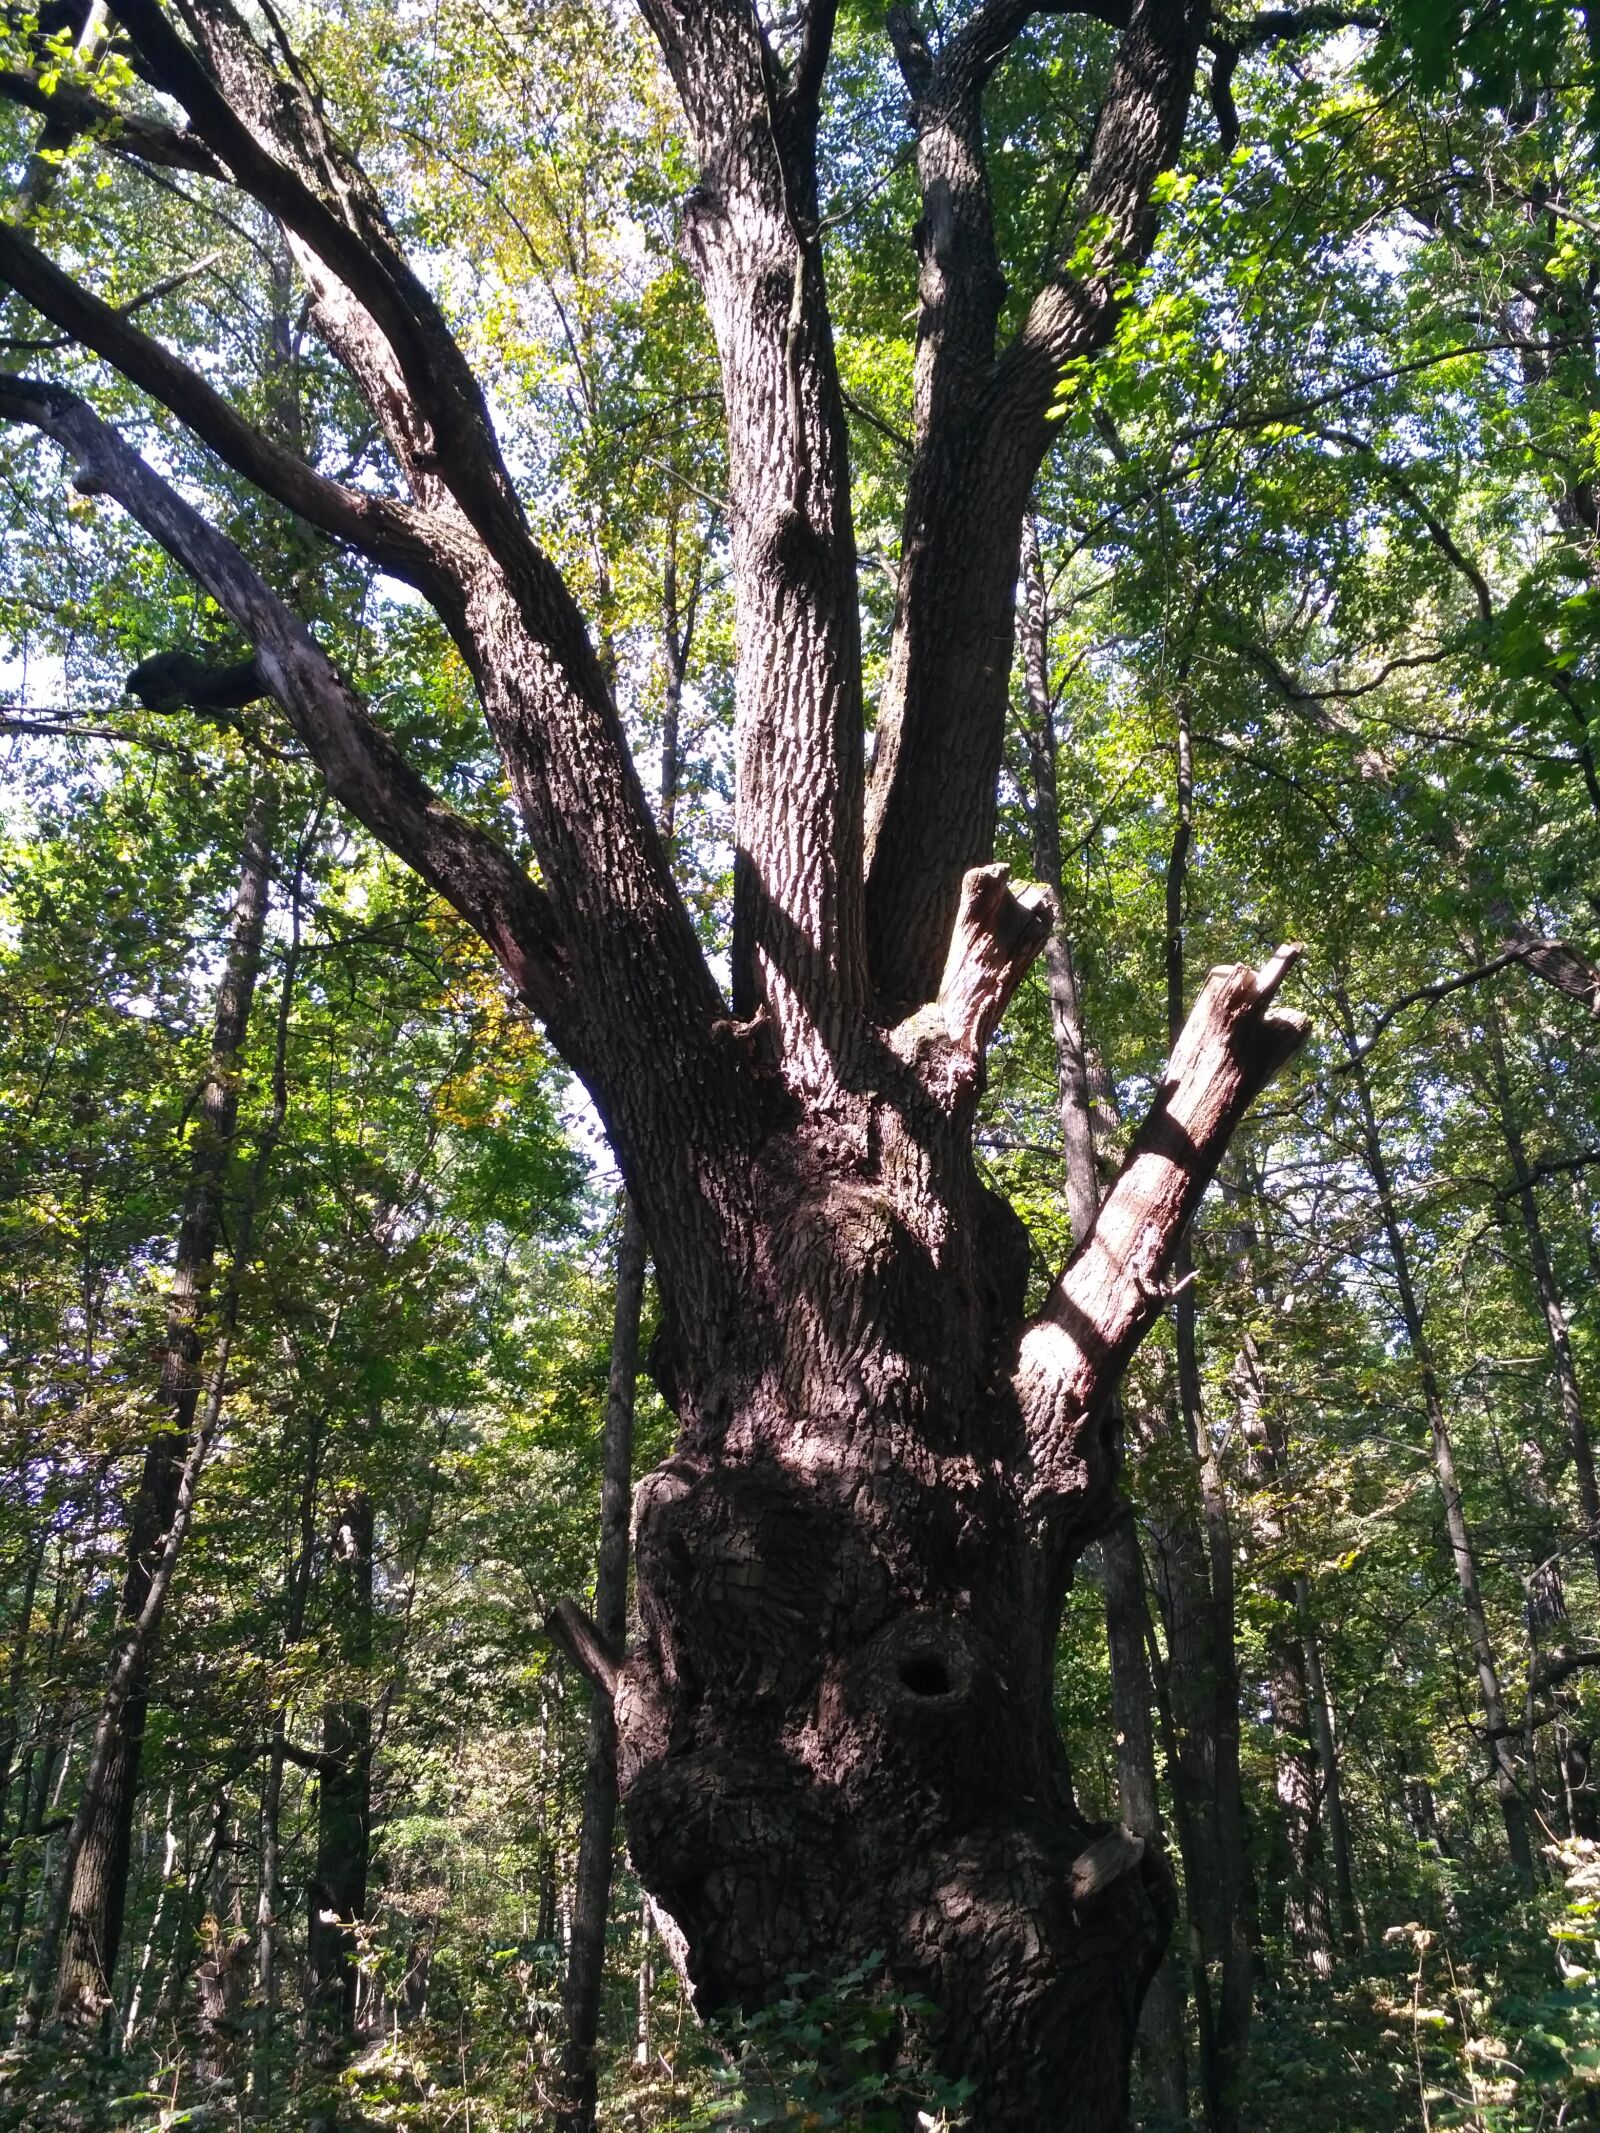 Xiaomi Redmi 3S sample photo. Wood, old tree, nature photography